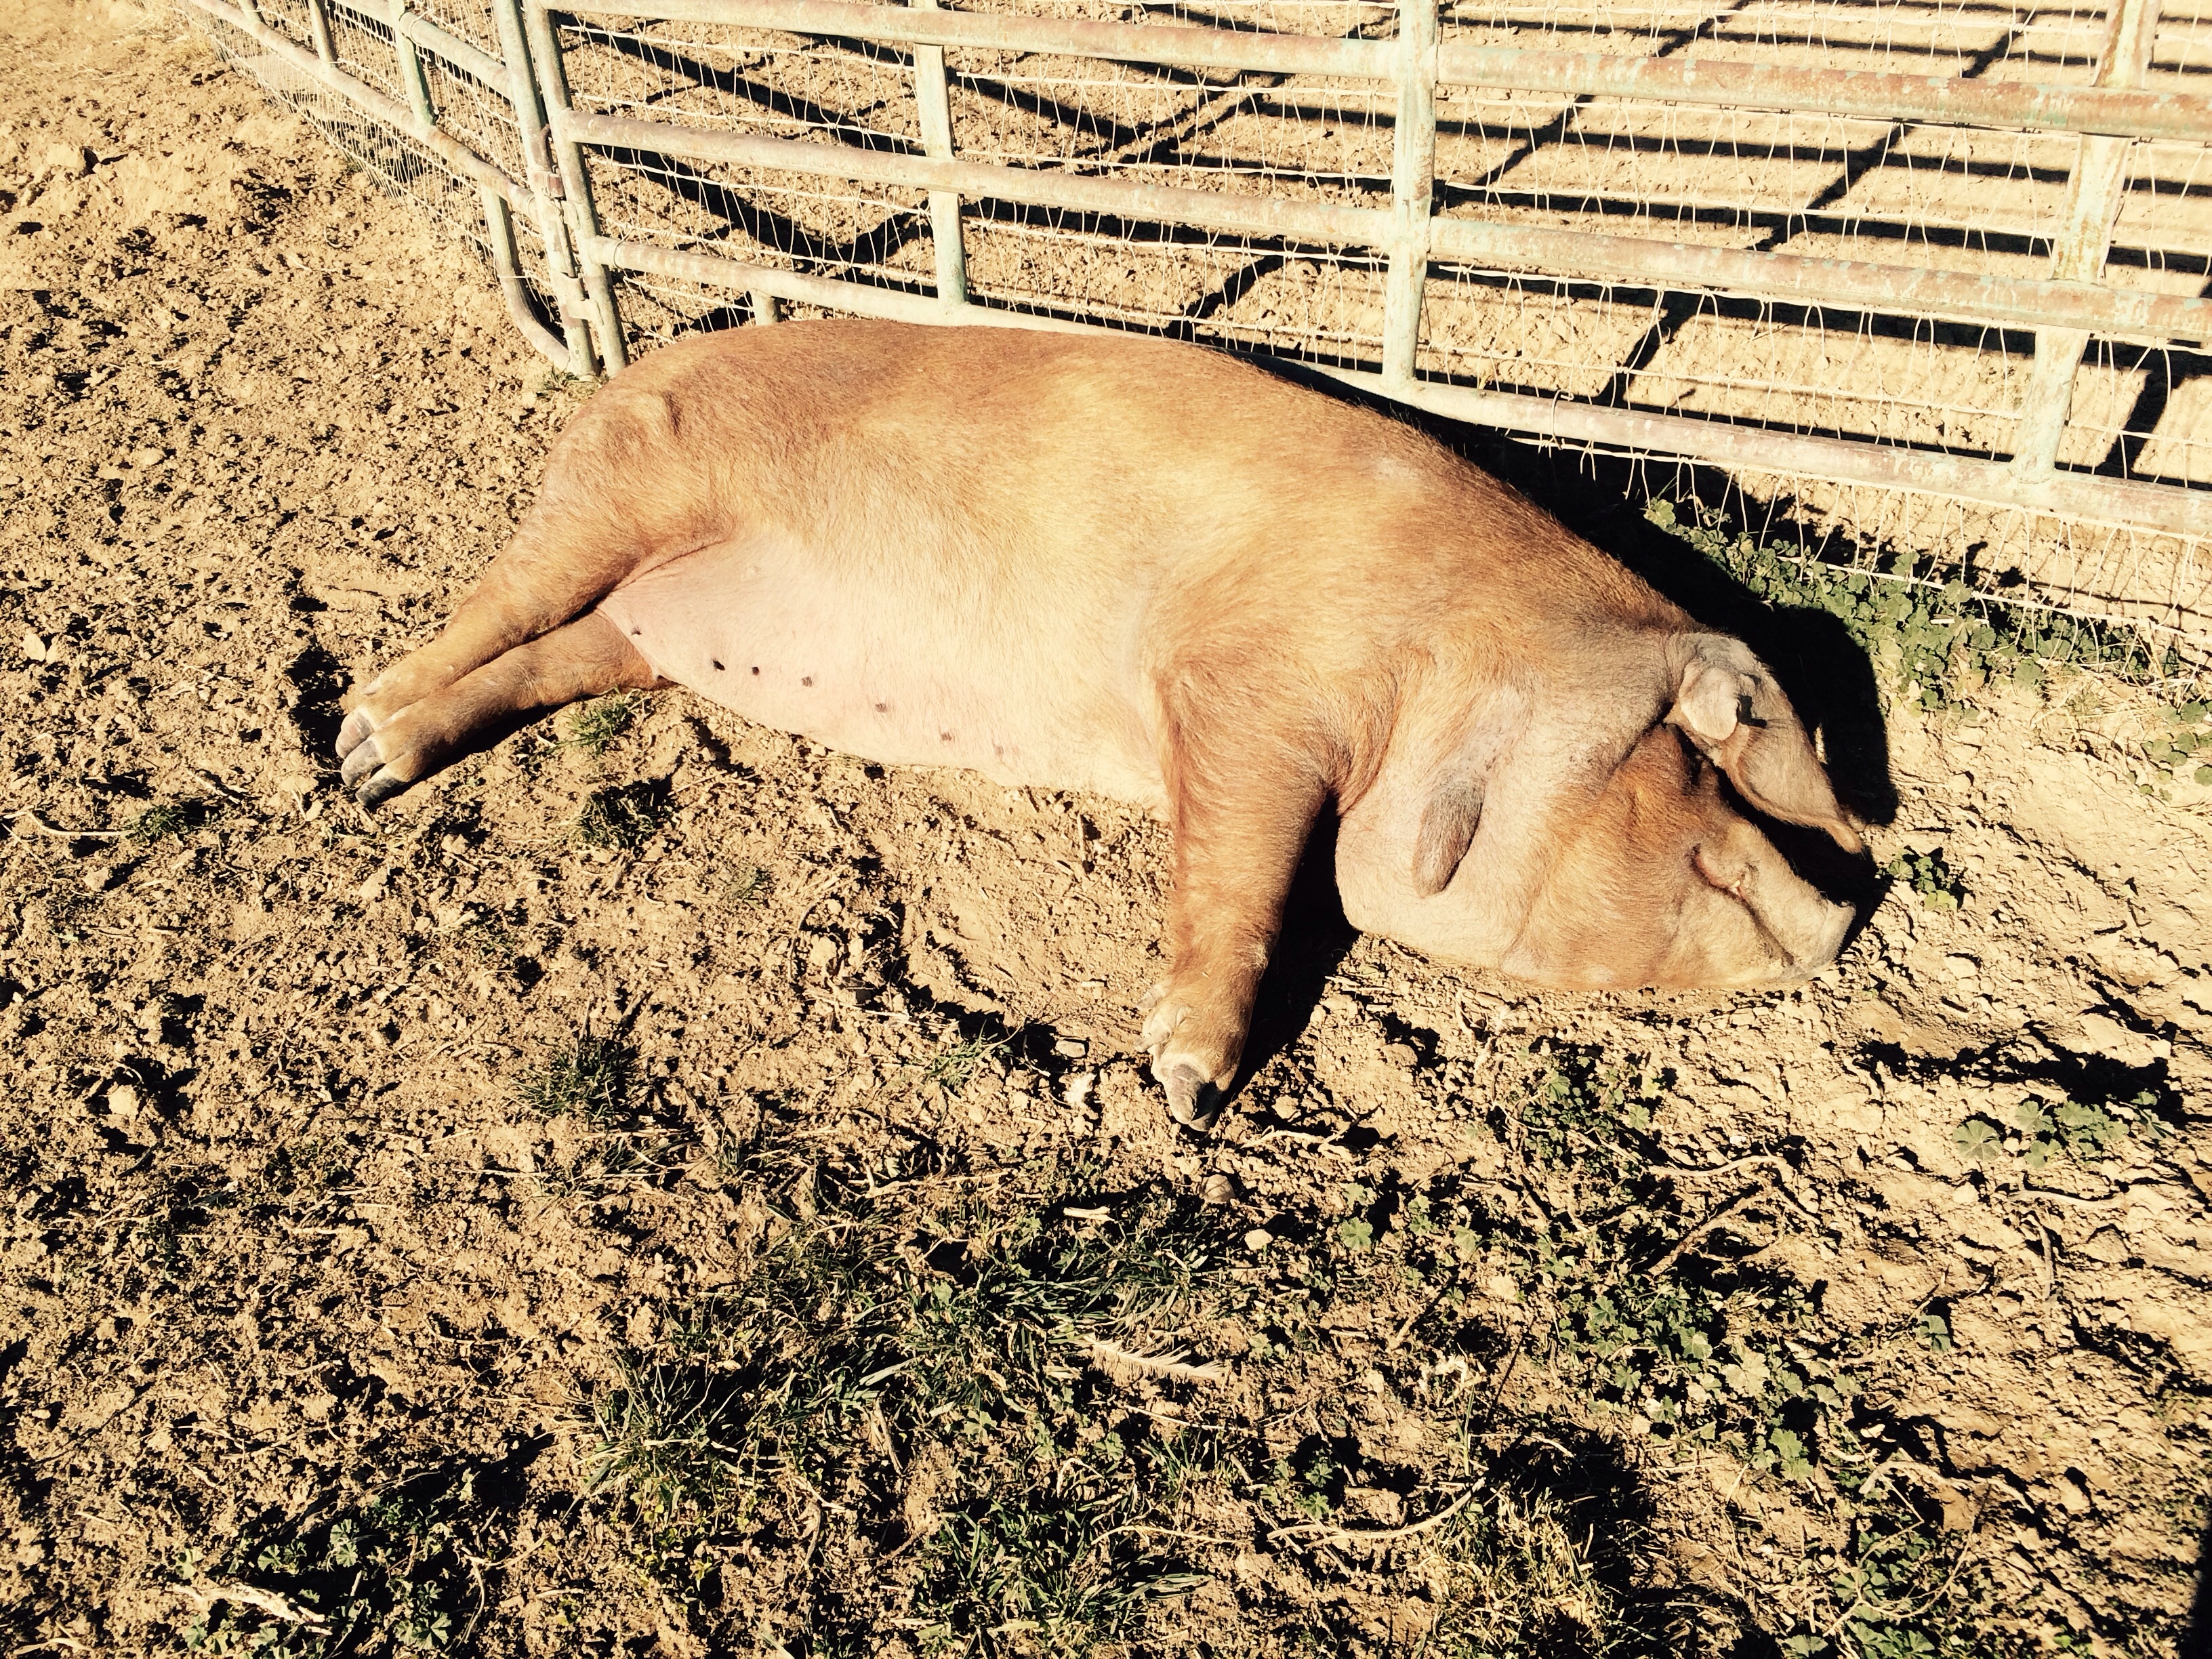 Our farm sow is enjoying the sunshine she loves her bellie rubbed as well 